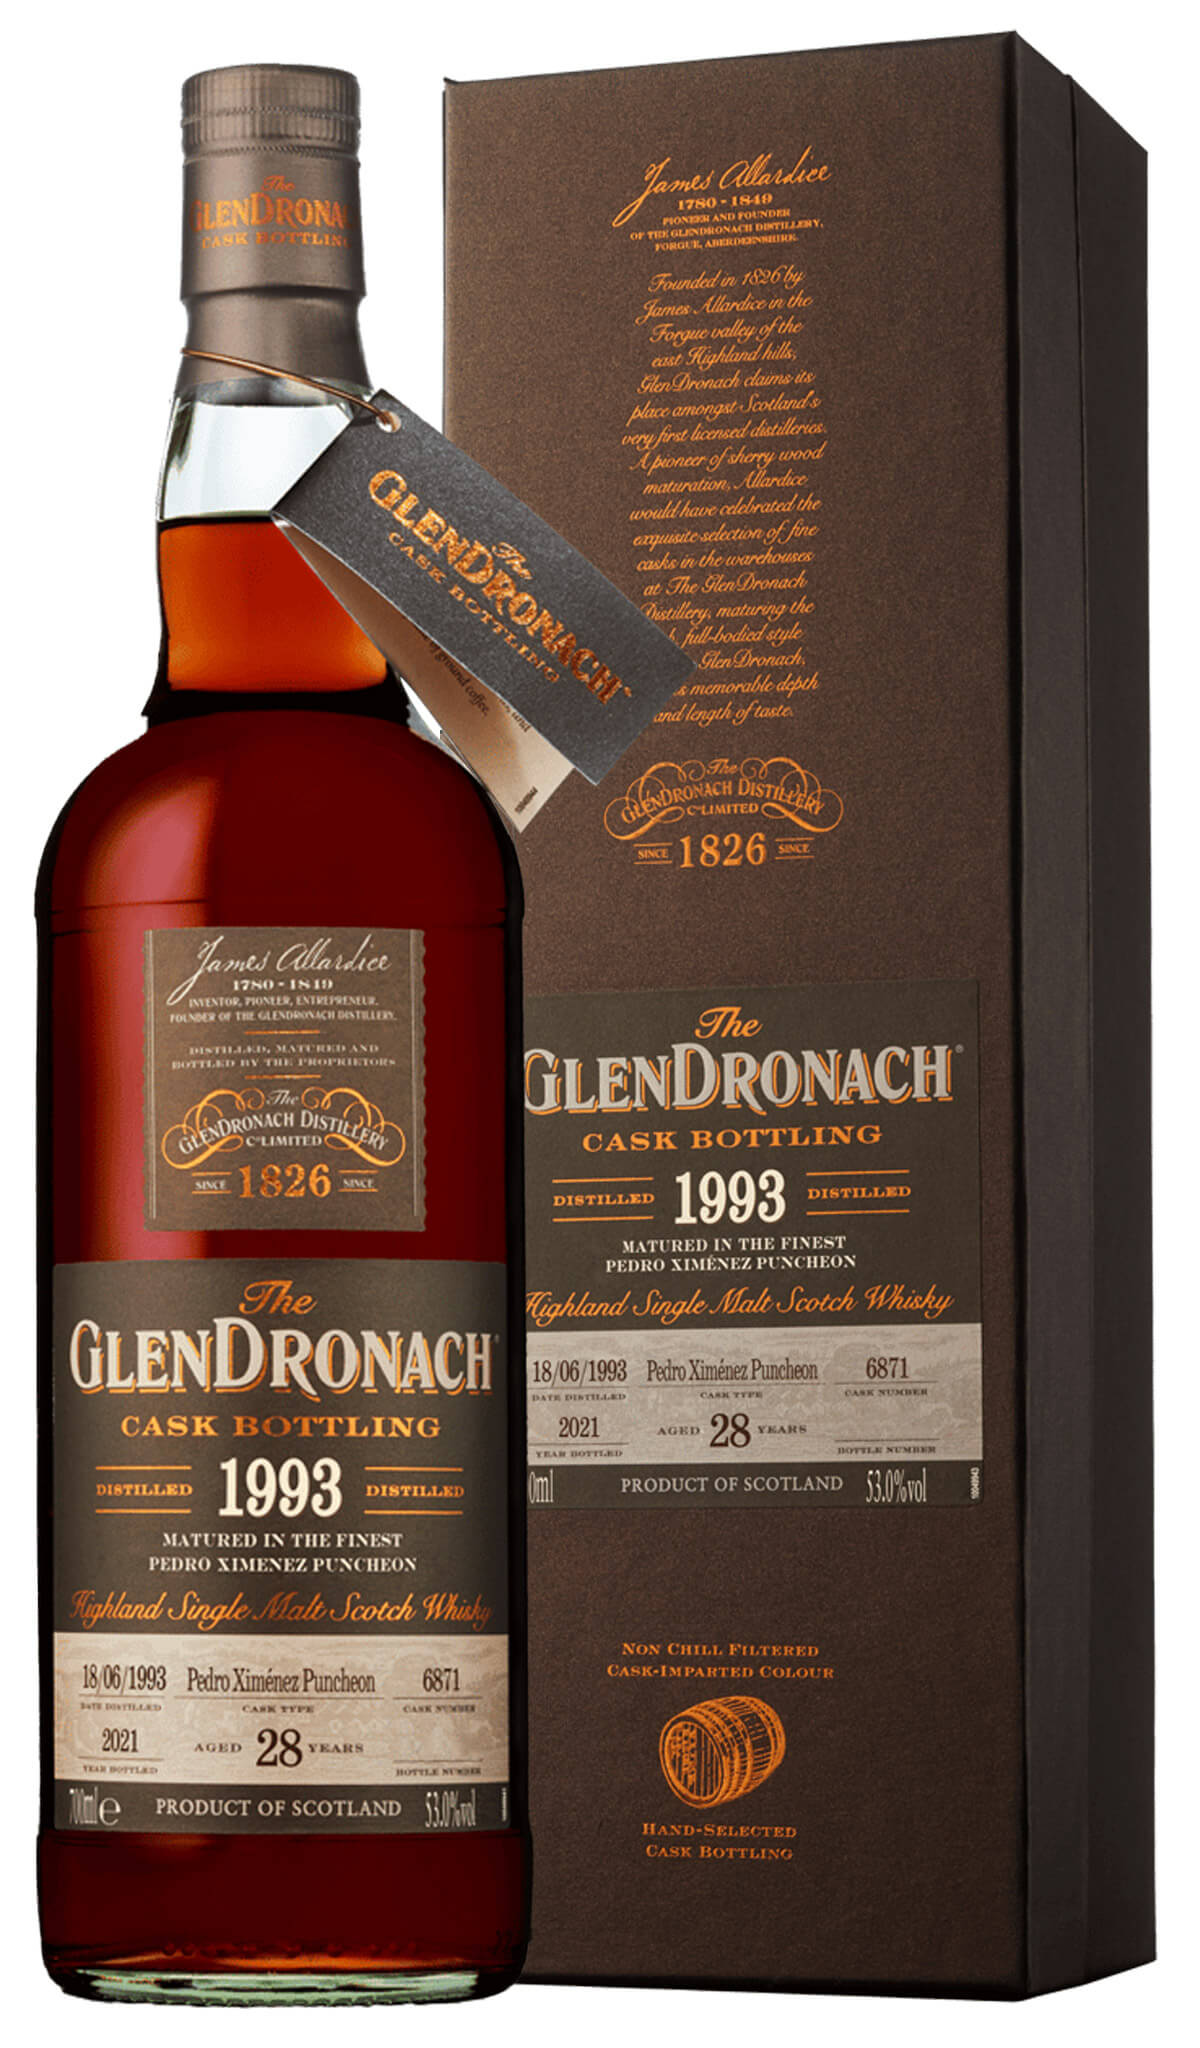 Find out more, explore the range and buy The GlenDronach 1993 Single Cask 28 Year Old Cask 6871 Single Malt Scotch Whisky 700mL available online at Wine Sellers Direct - Australia's independent liquor specialists.